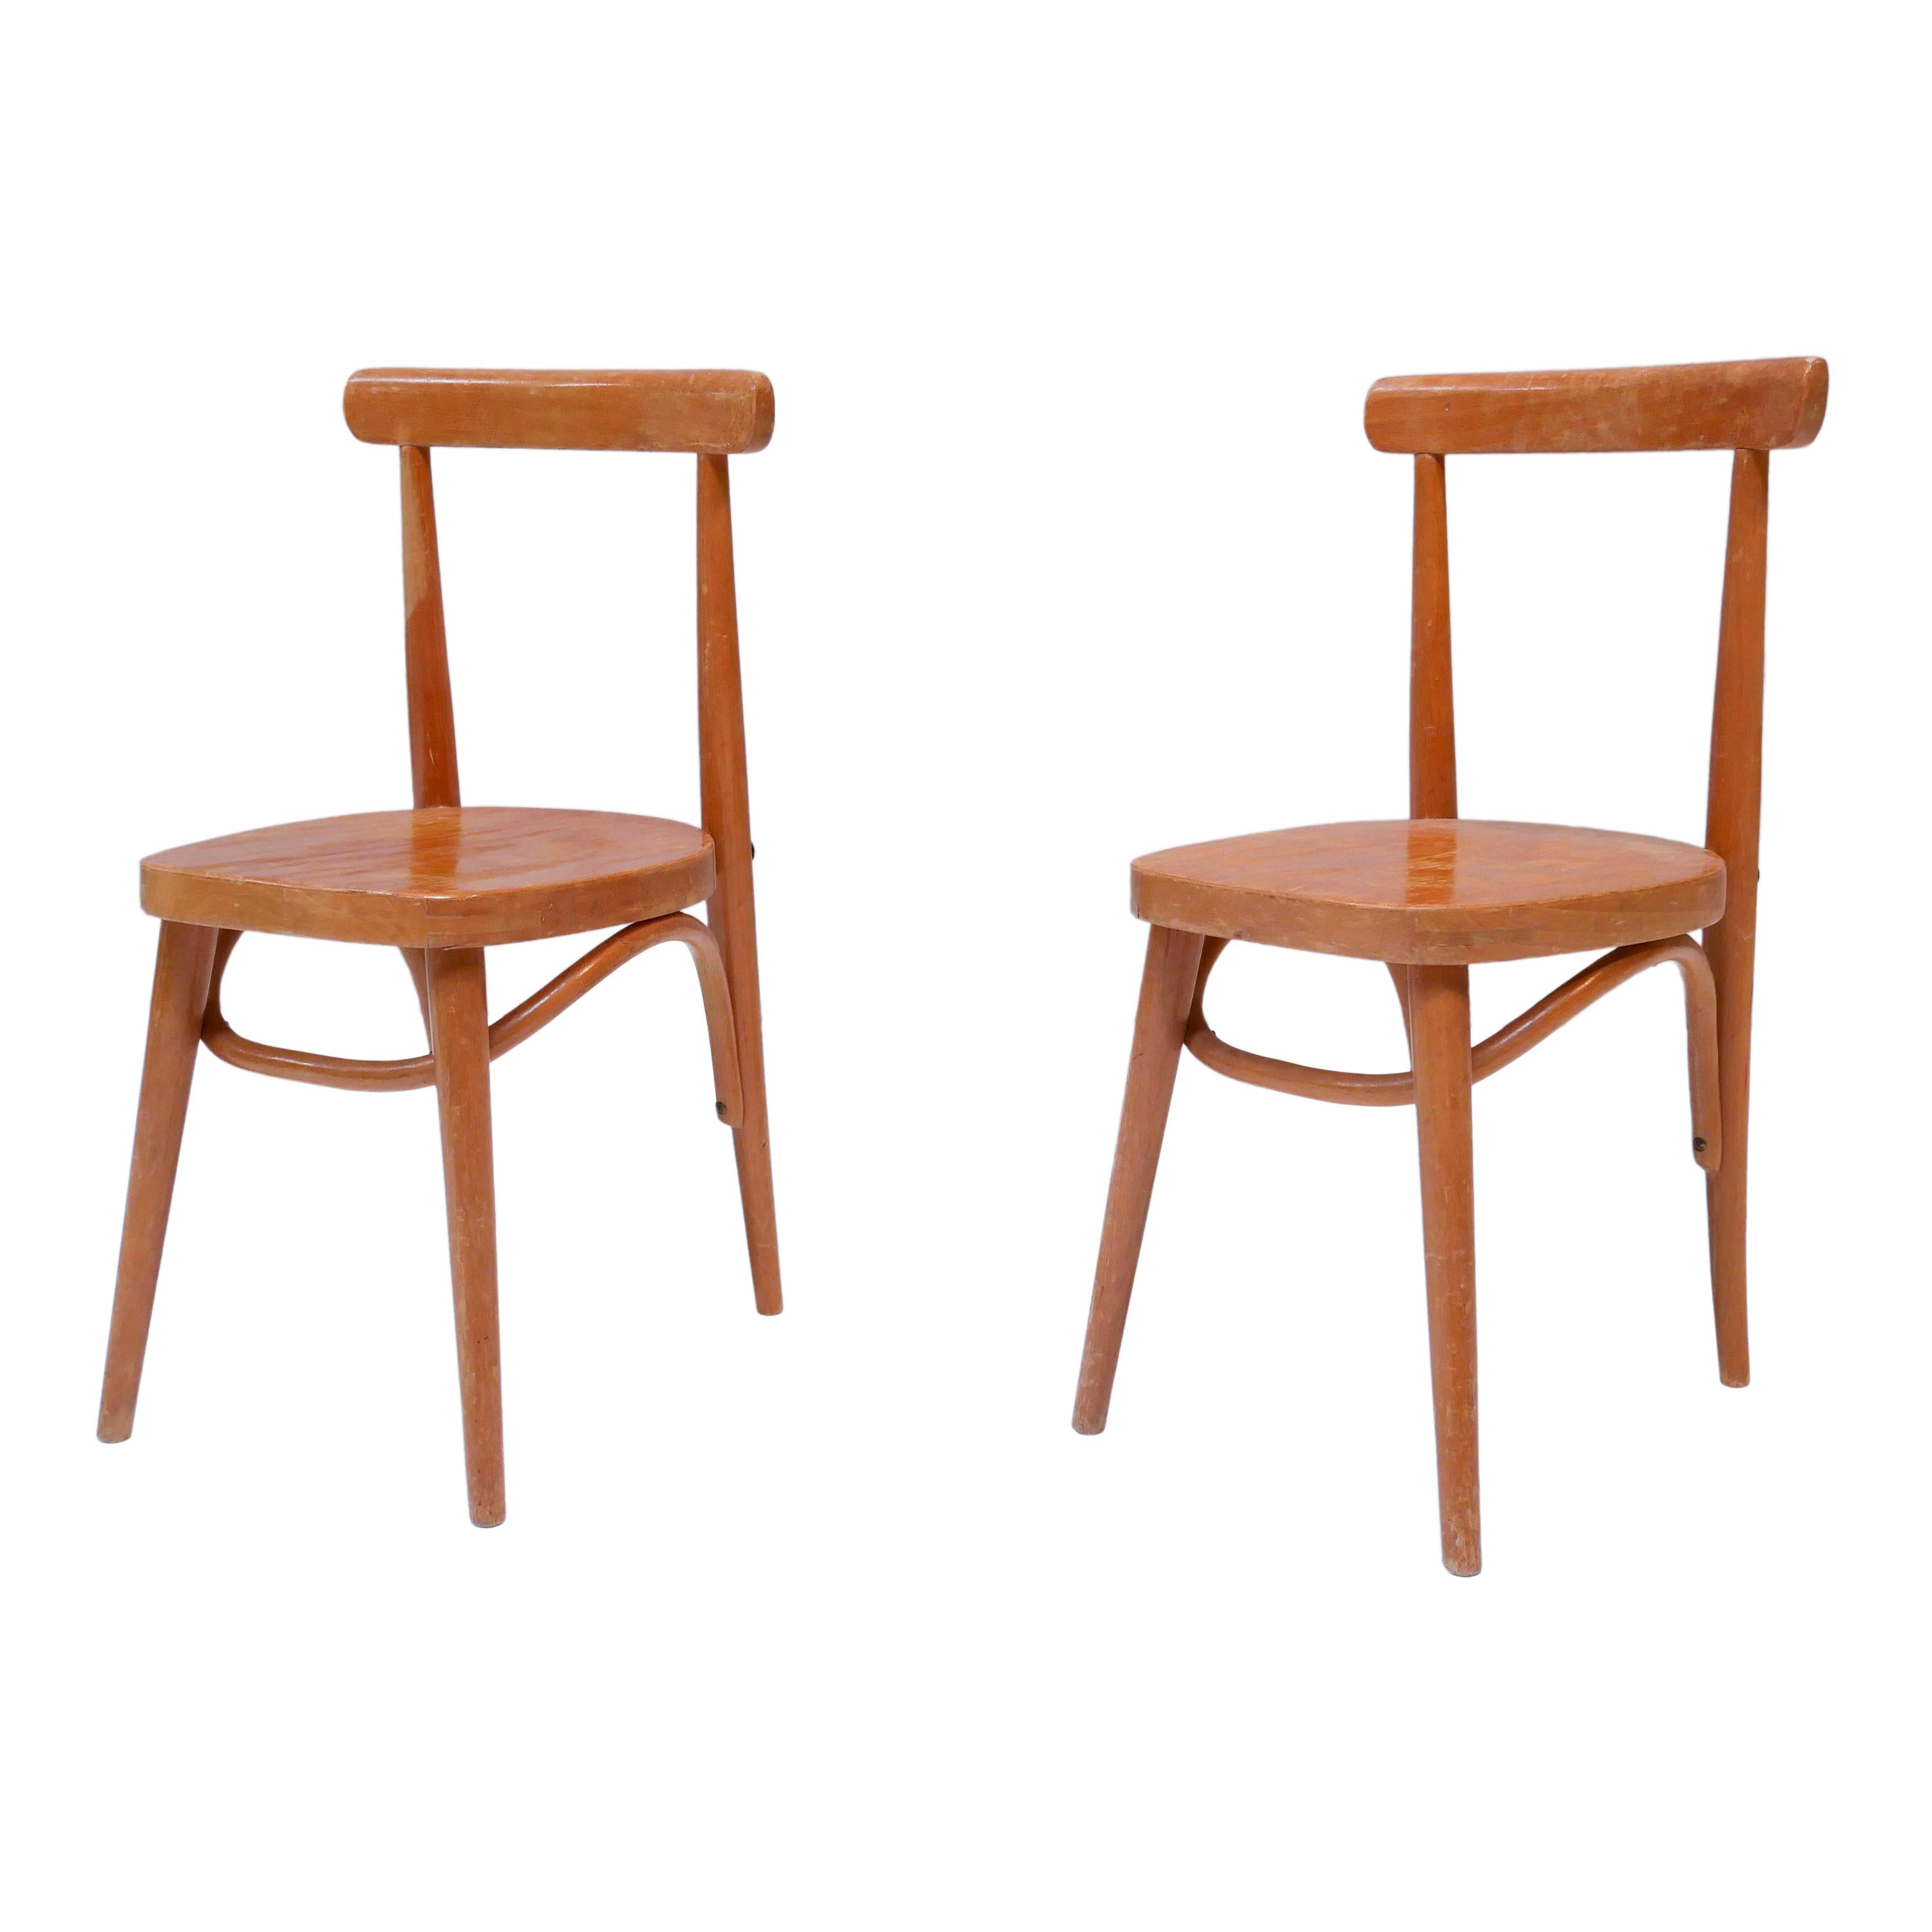 Thonet Style Children's Bentwood Chairs, 1950s, Sweden For Sale